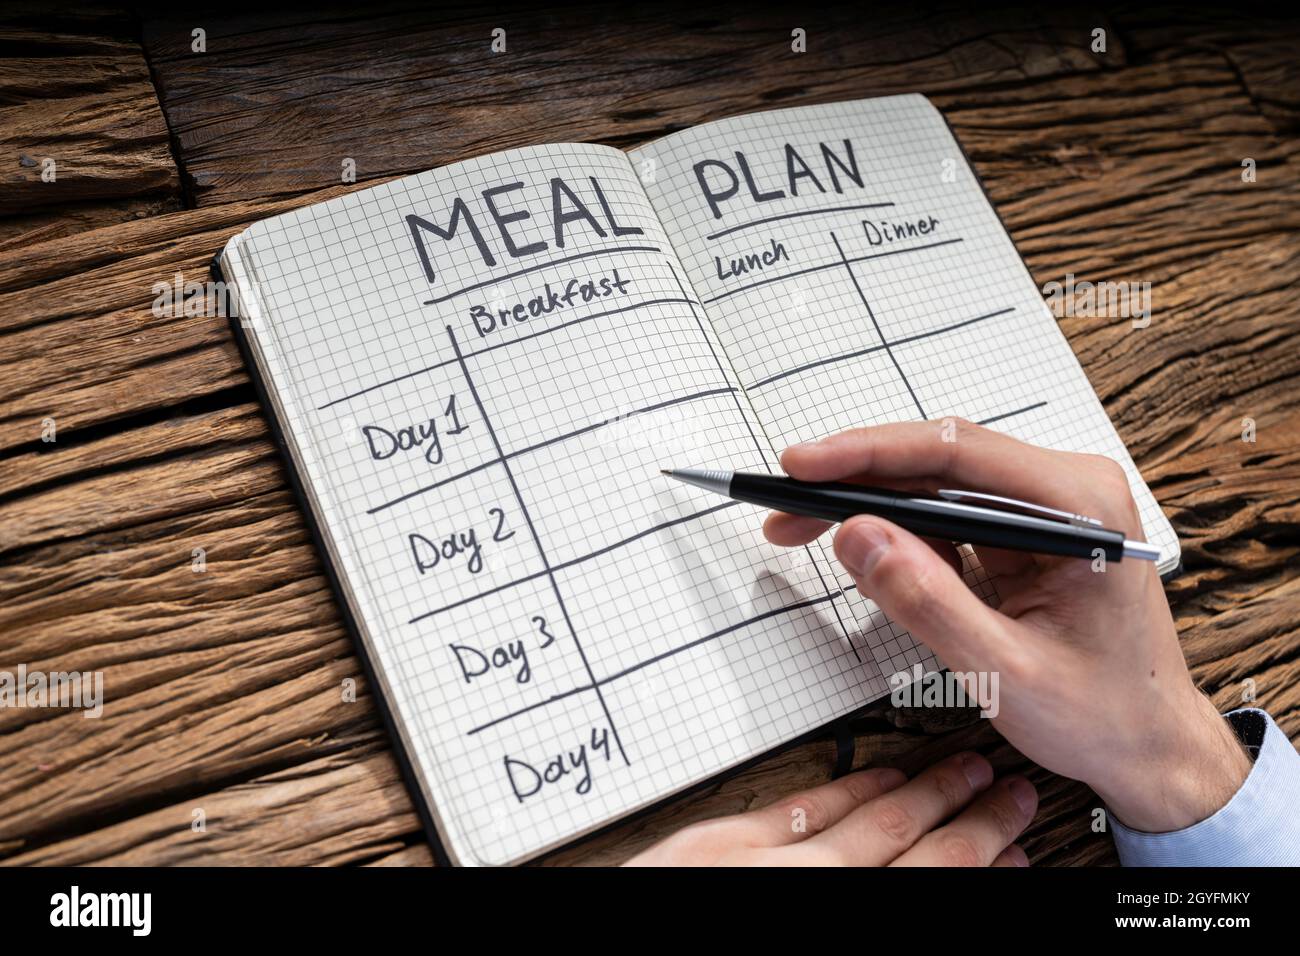 Meal Plan Nutrition Goals And Diet List Stock Photo